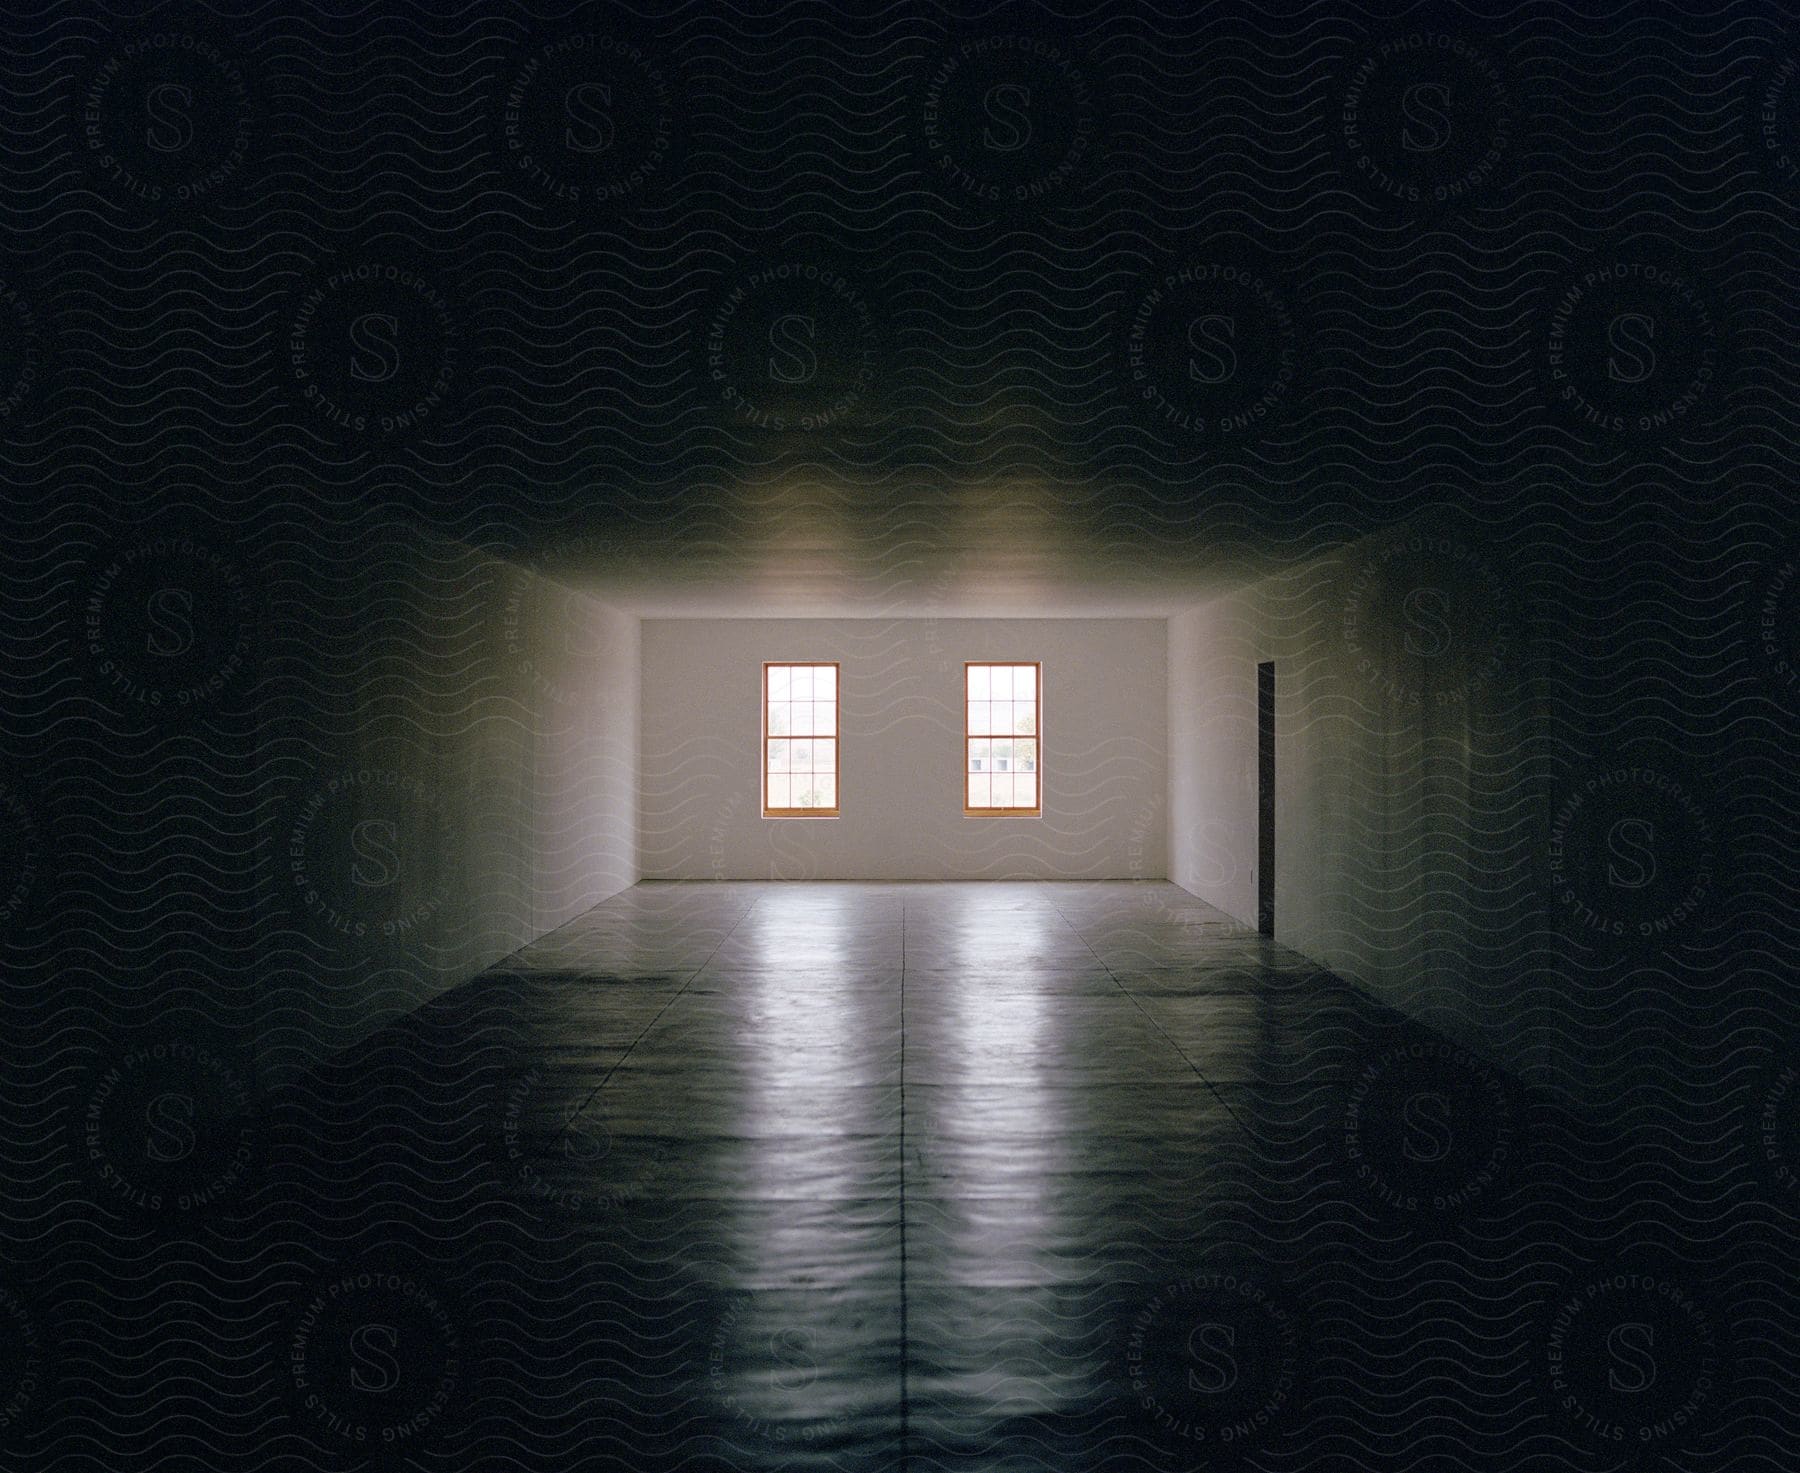 A dimly lit room with two windows on the far wall a door in the middle and light shining through the windows